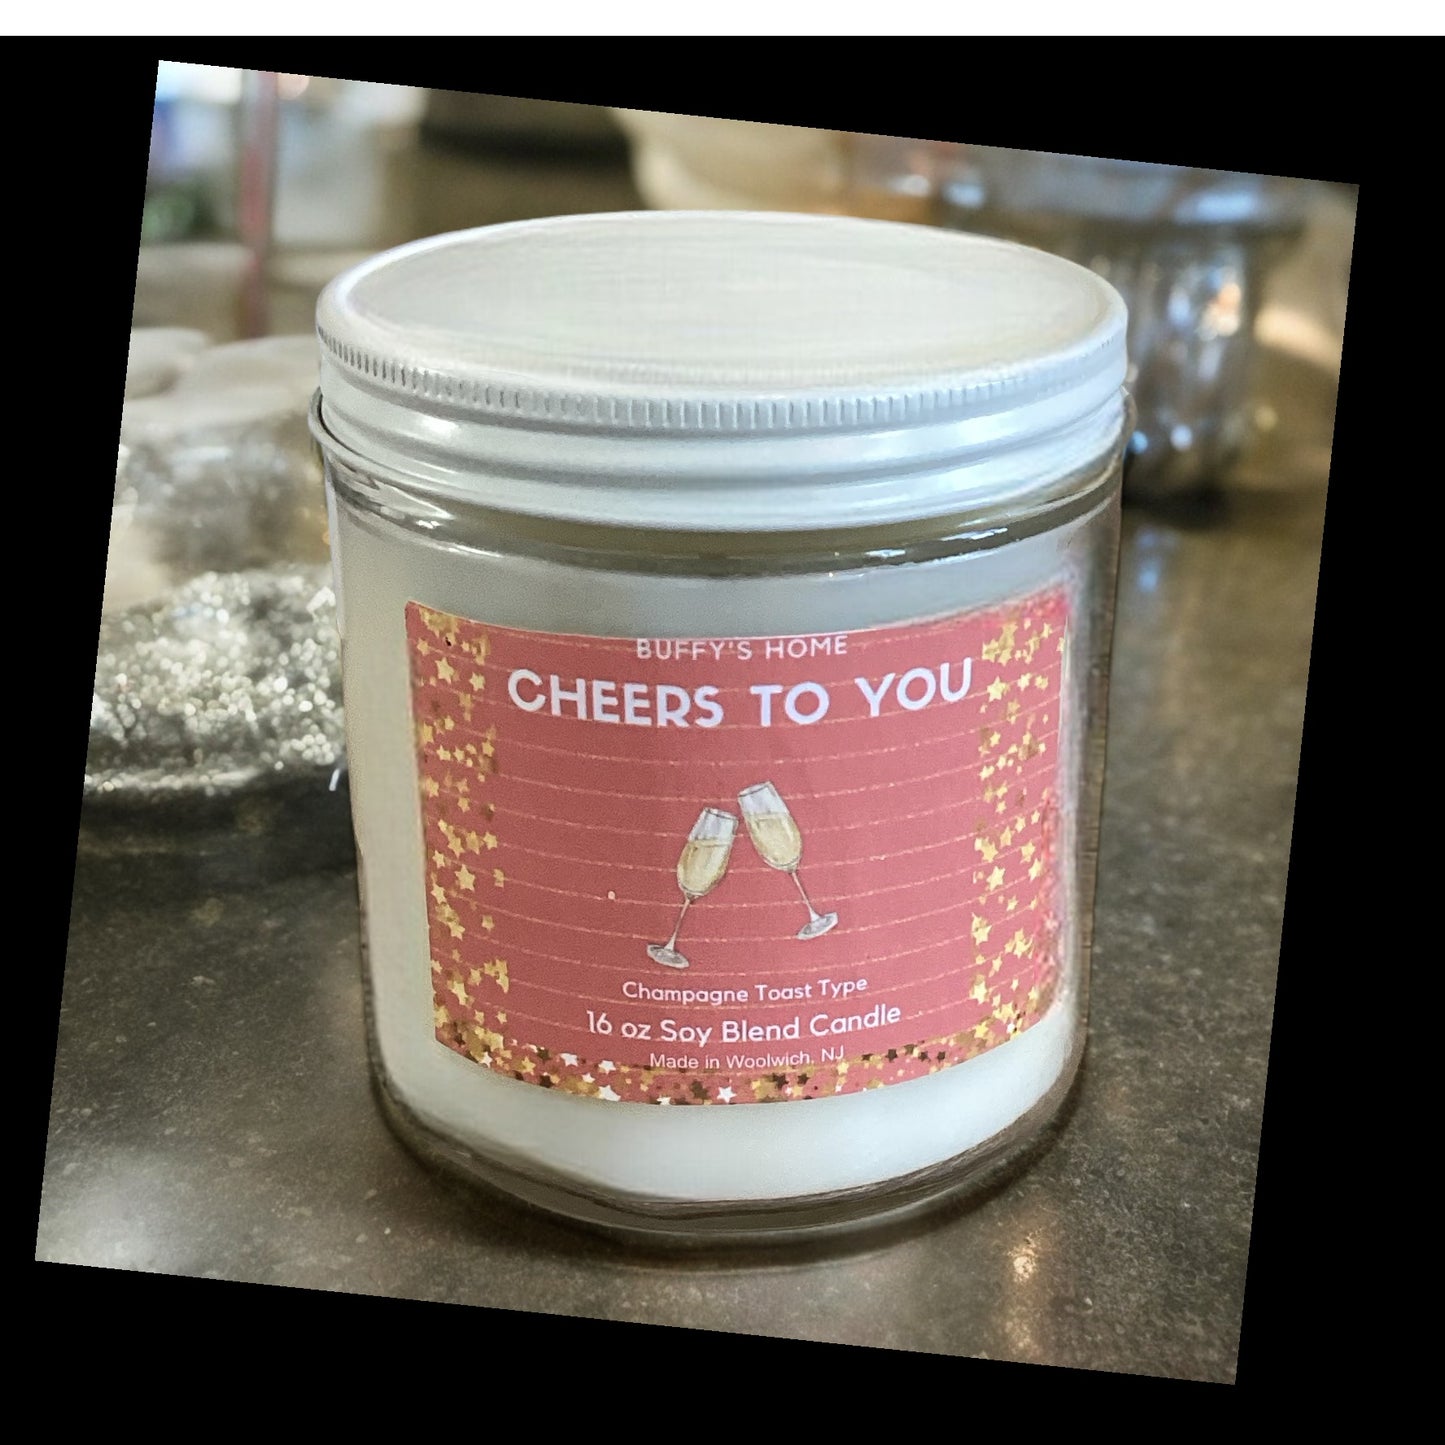 Cheers to you! Designer Fragrance Candle